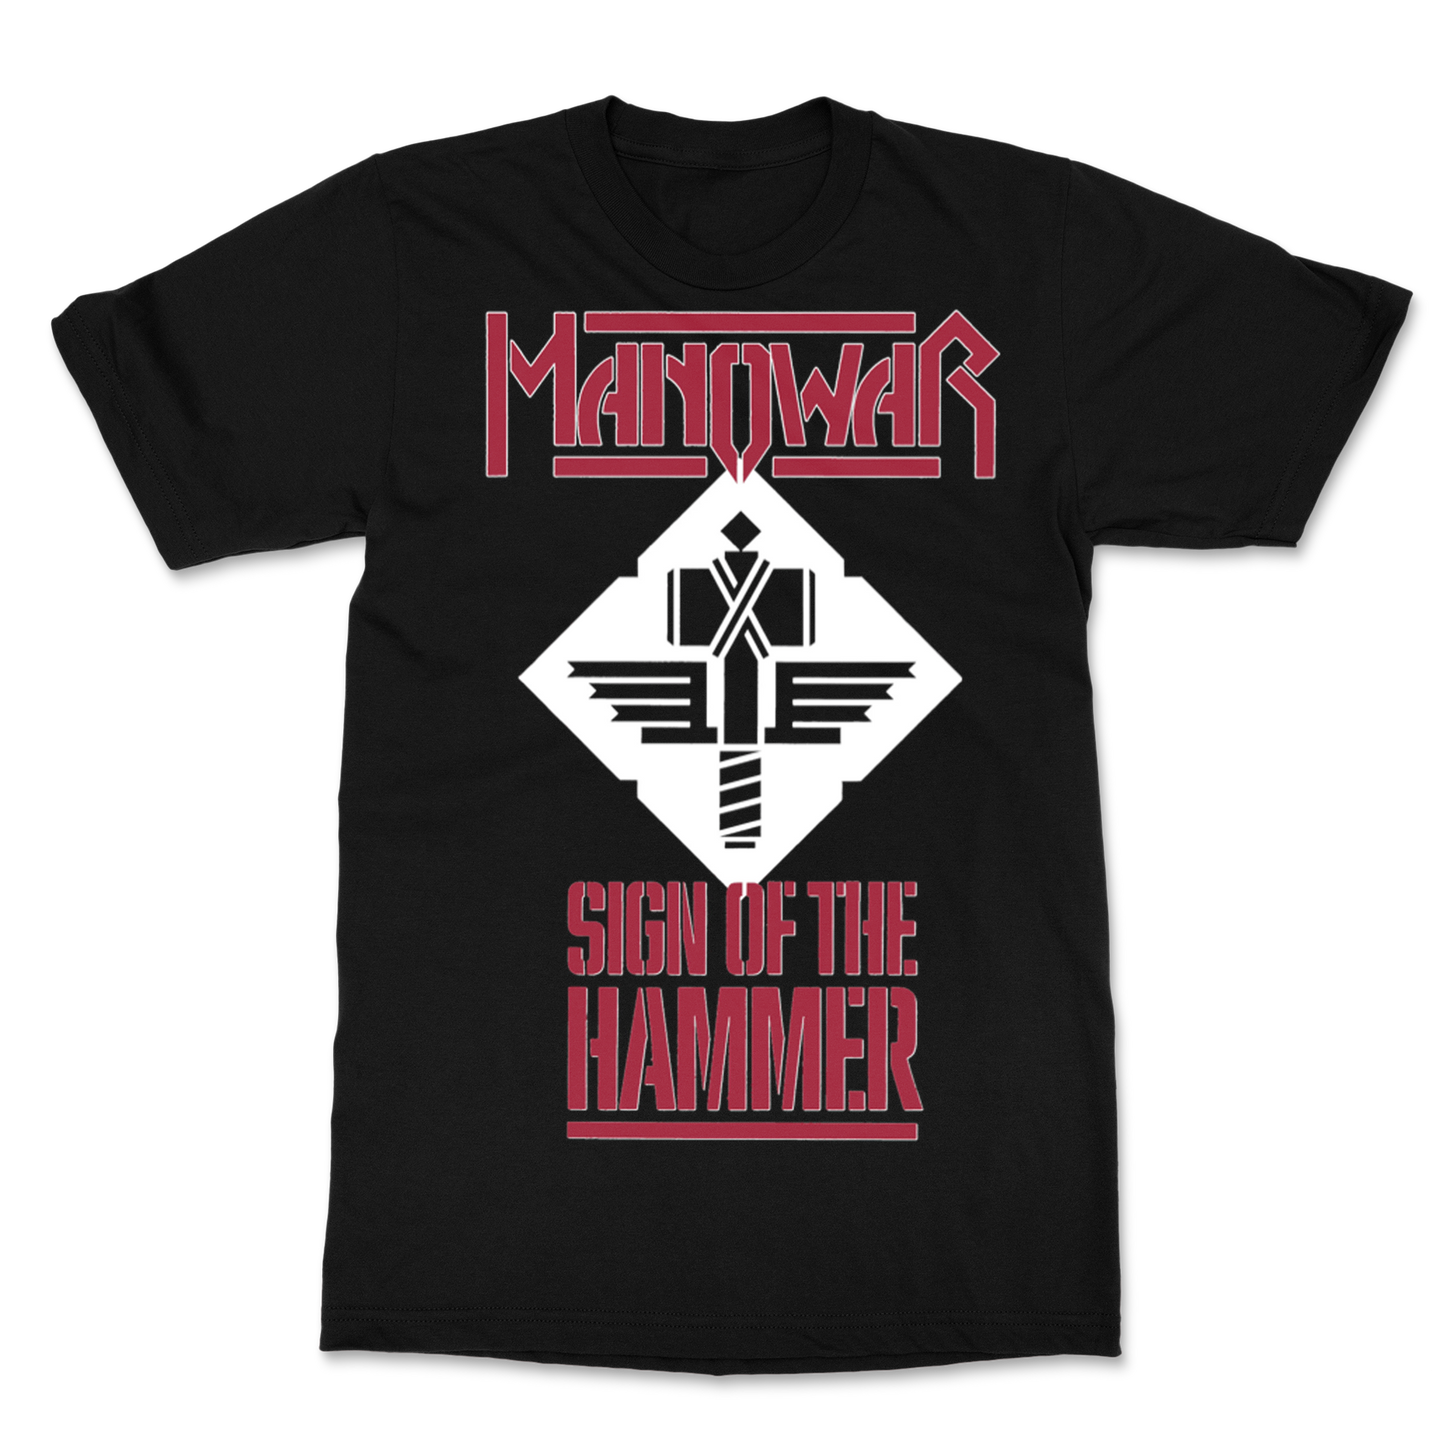 MANOWAR T-SHIRT SIGN OF THE HAMMER RED ON BLACK (LEGACY)